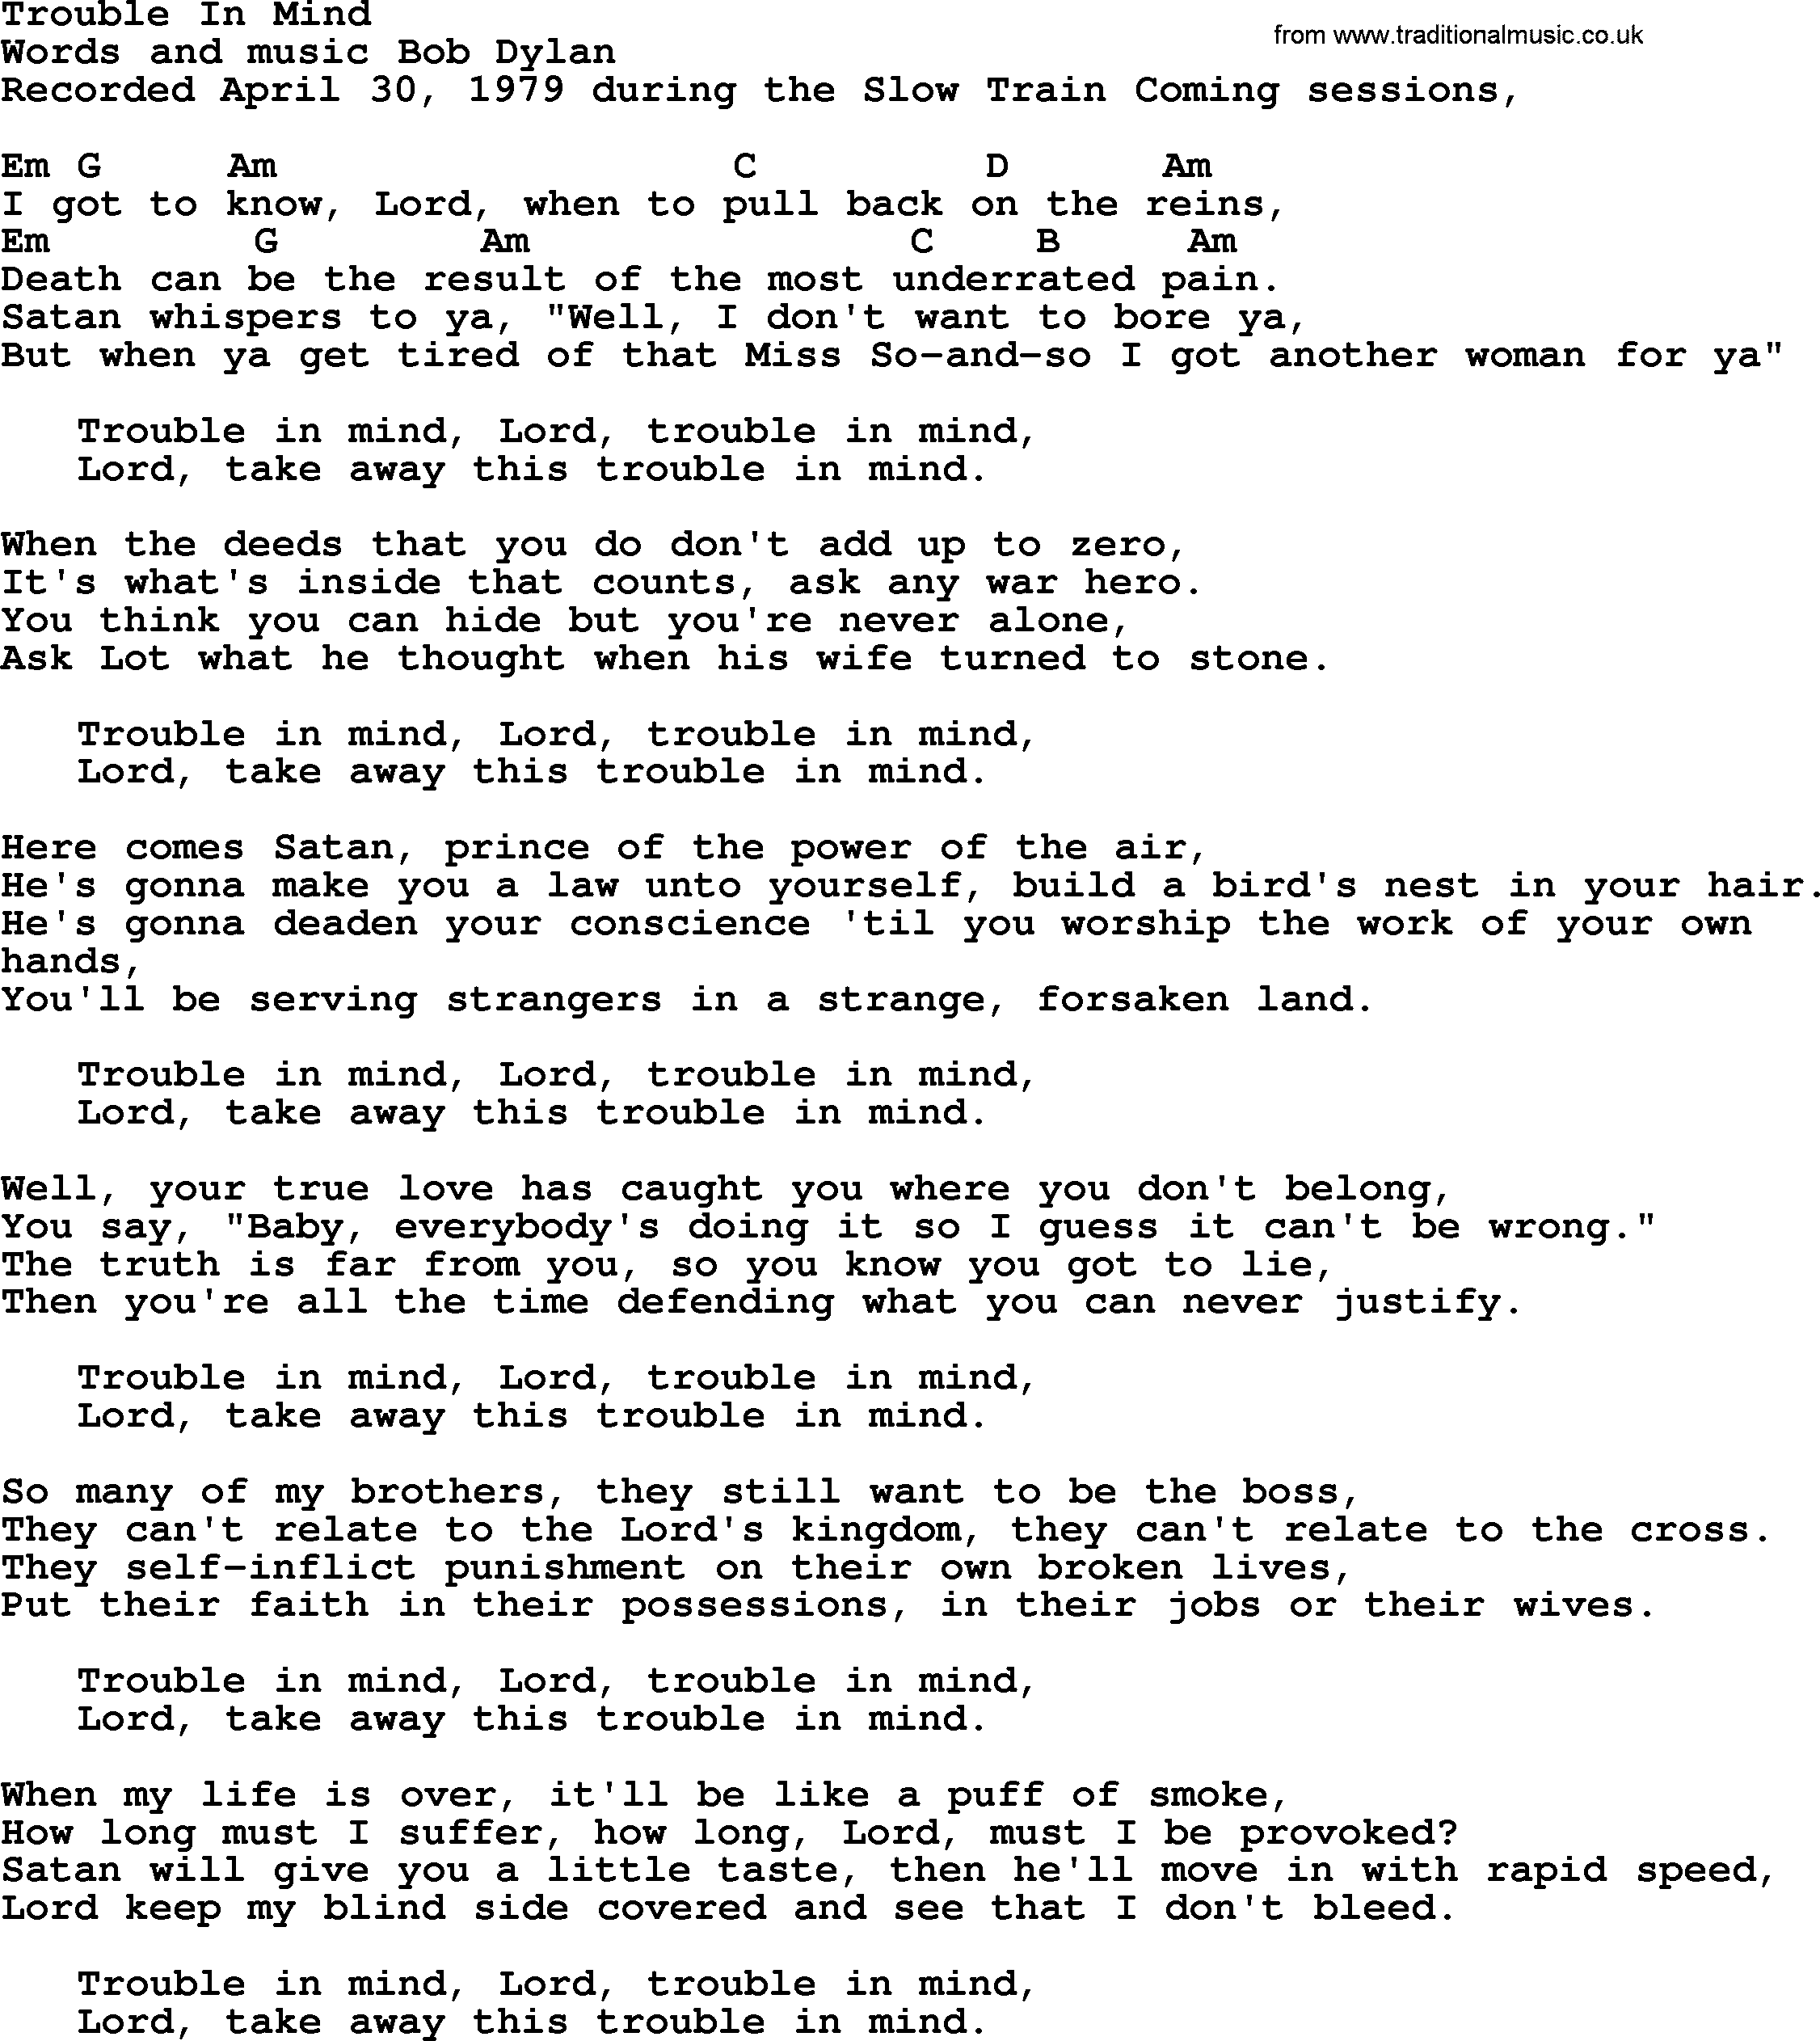 Bob Dylan song, lyrics with chords - Trouble In Mind